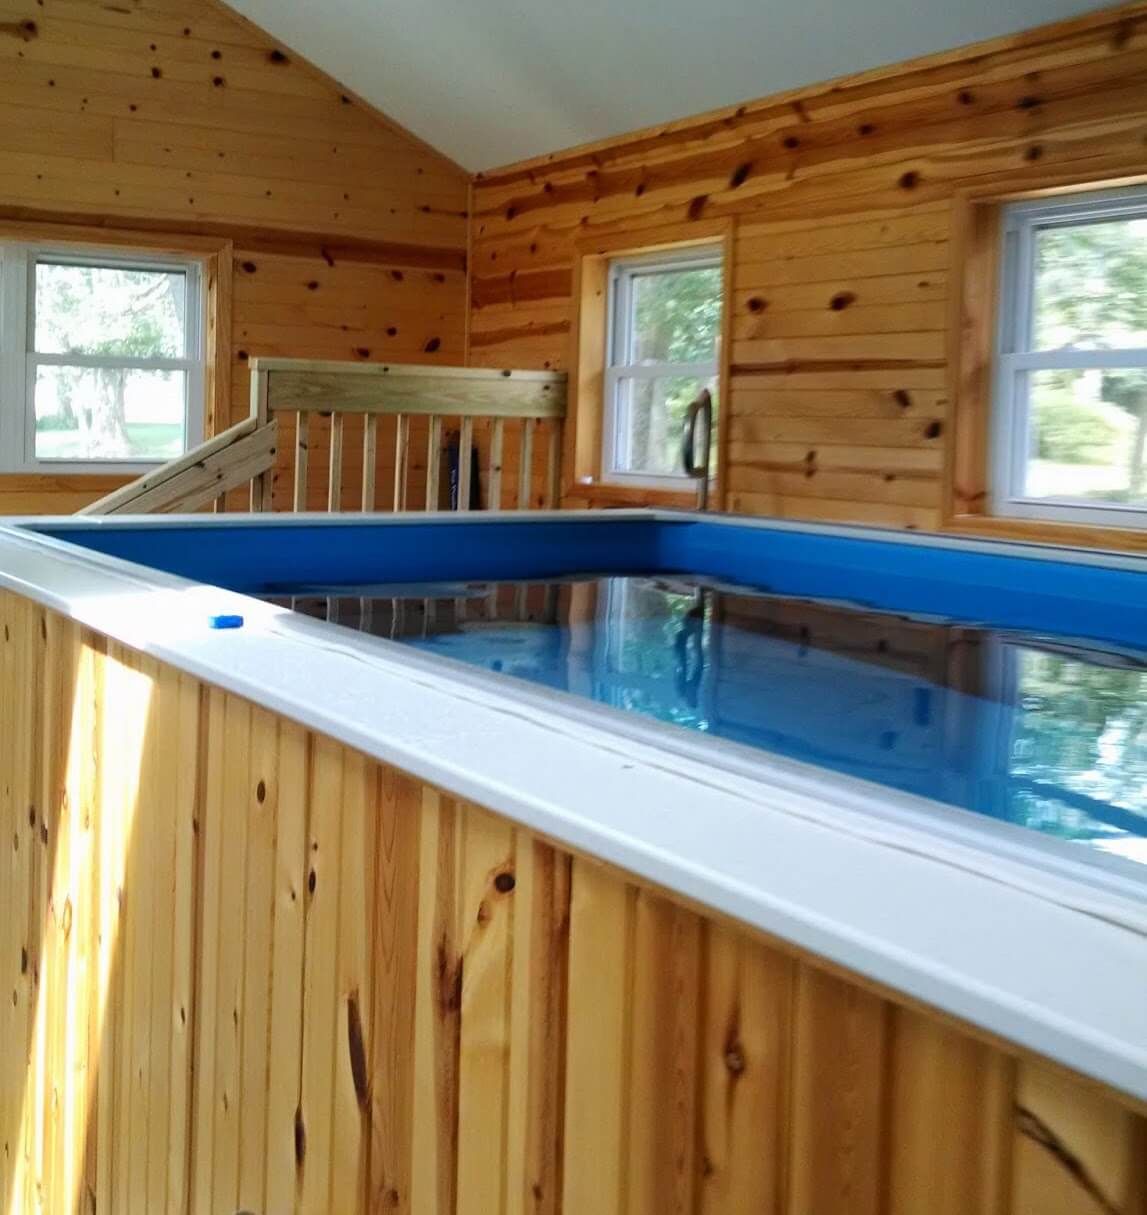 The Endless Pool that Meg O uses for aquatic therapy and pain relief